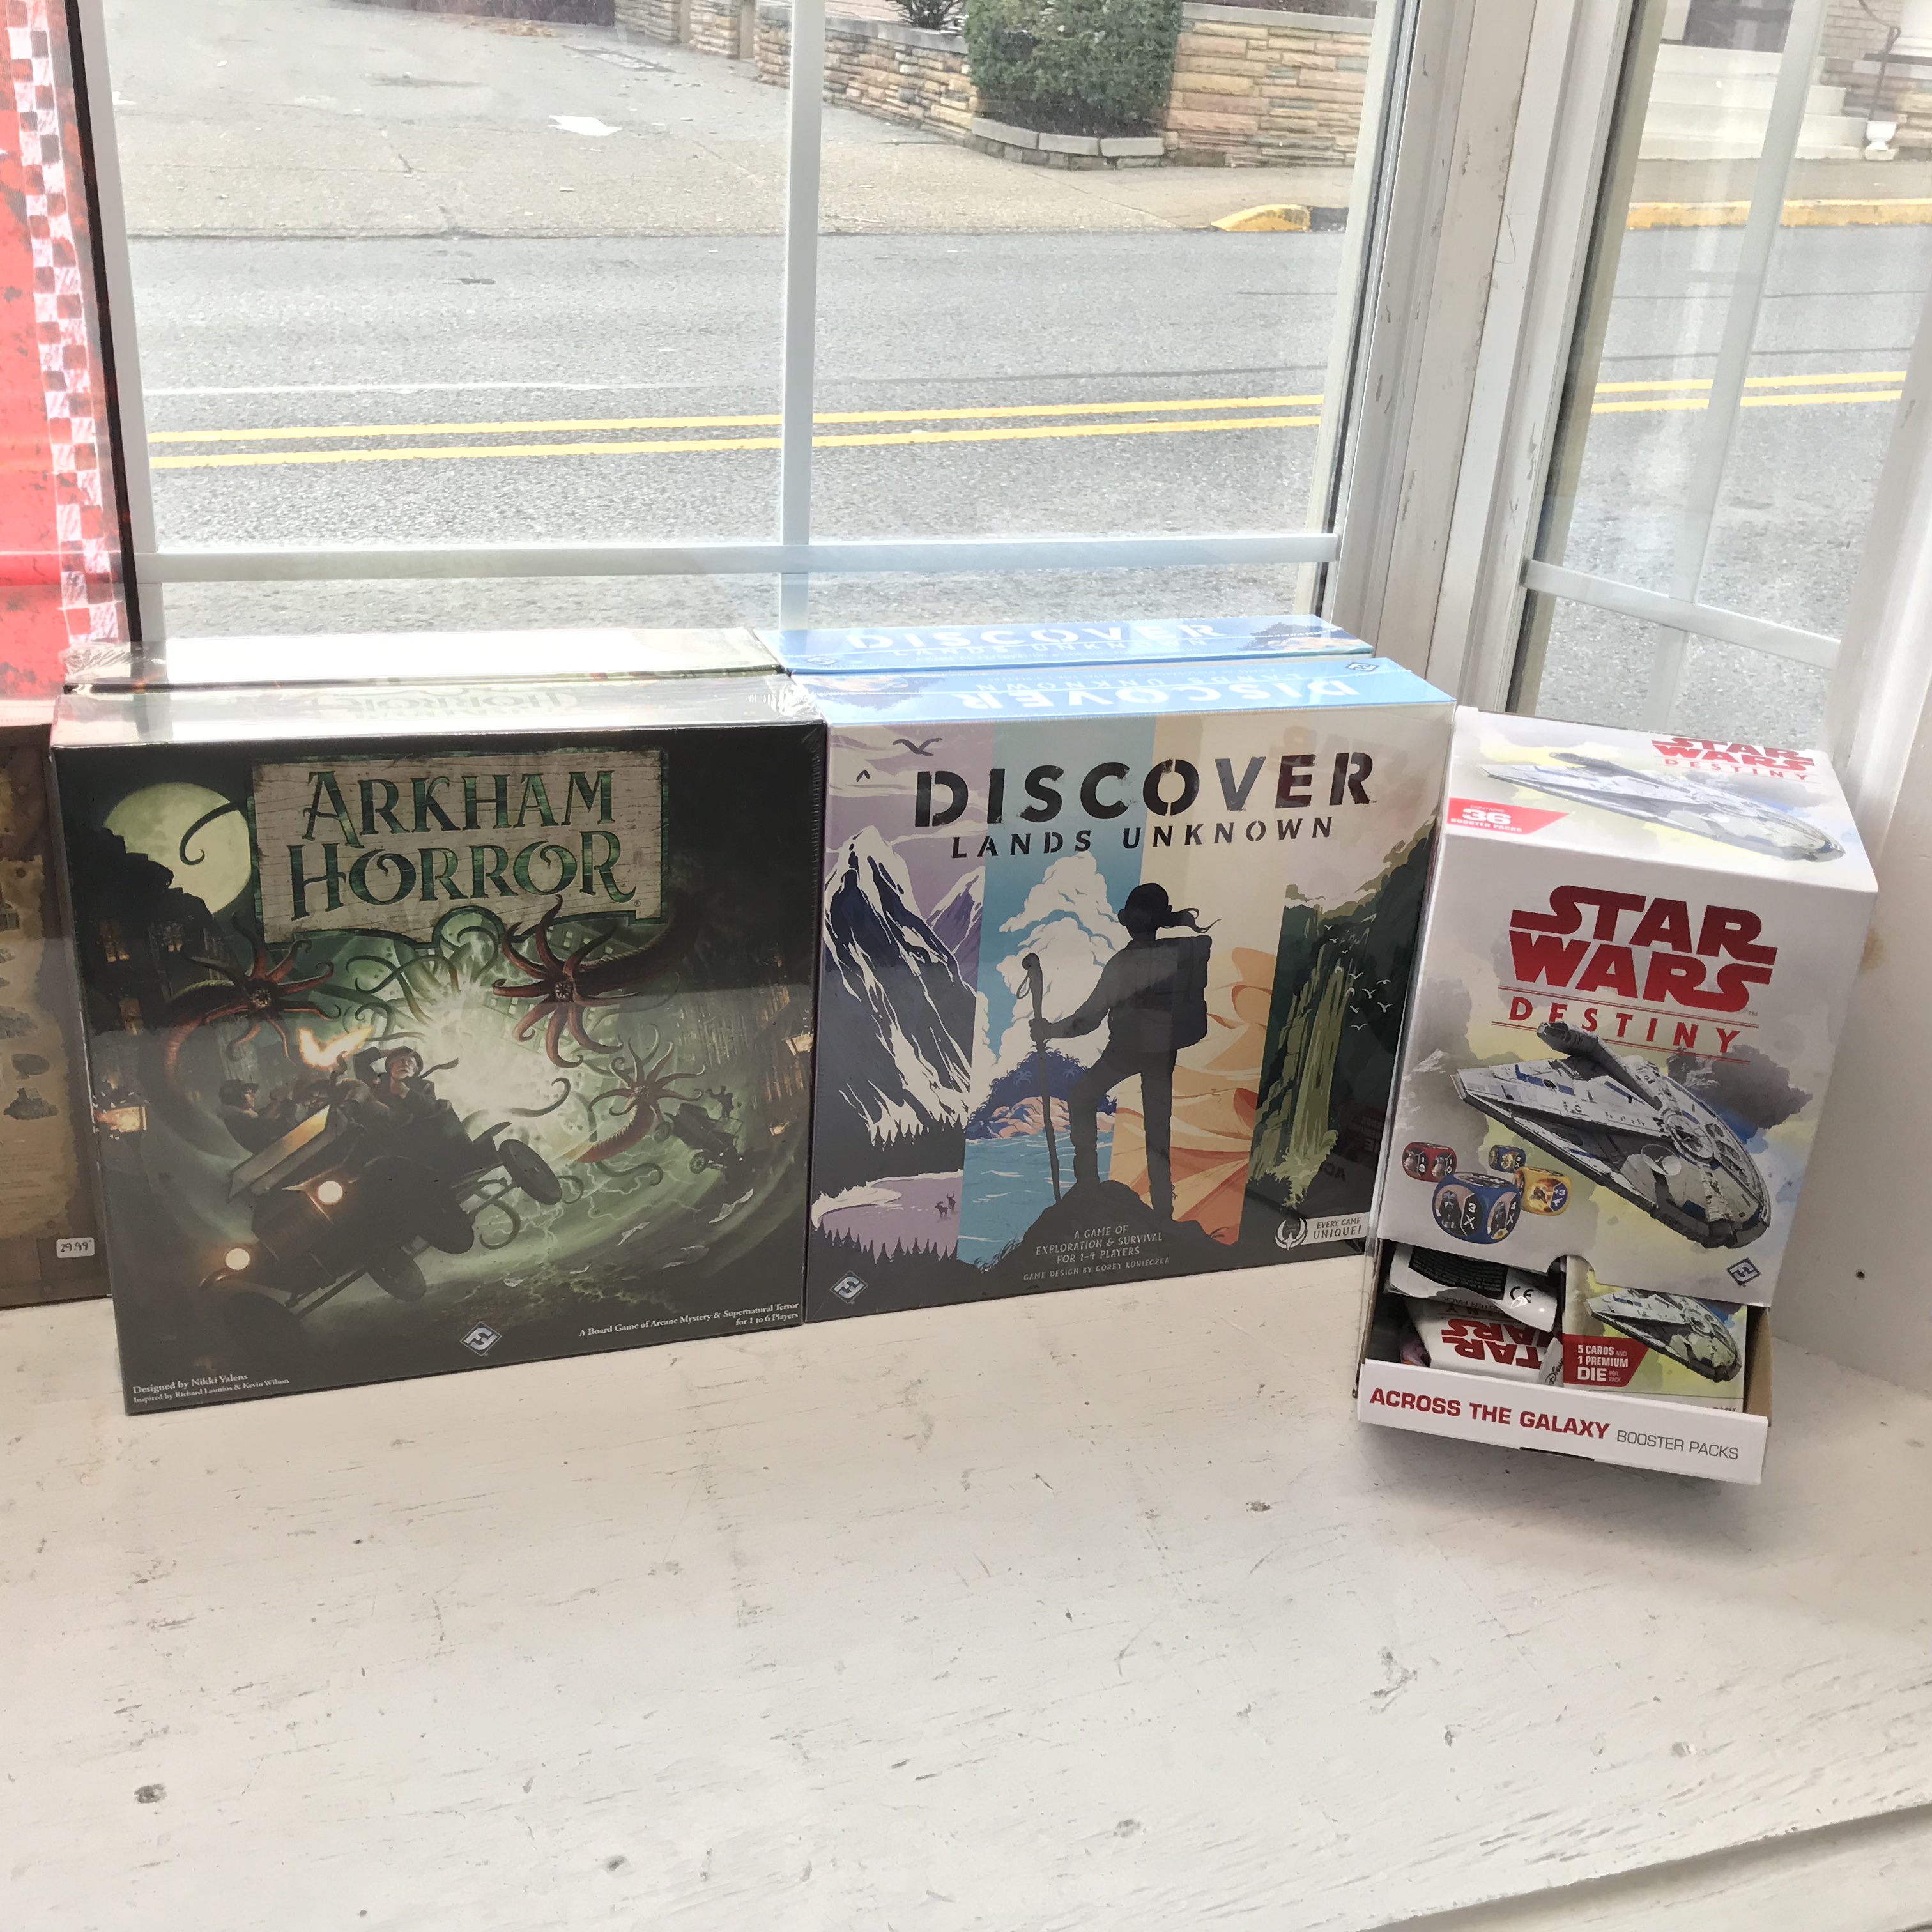 Arkham Horror 3rd Edition, Discover: Lands Unknown, and Star Wars: Destiny – Across the Galaxy